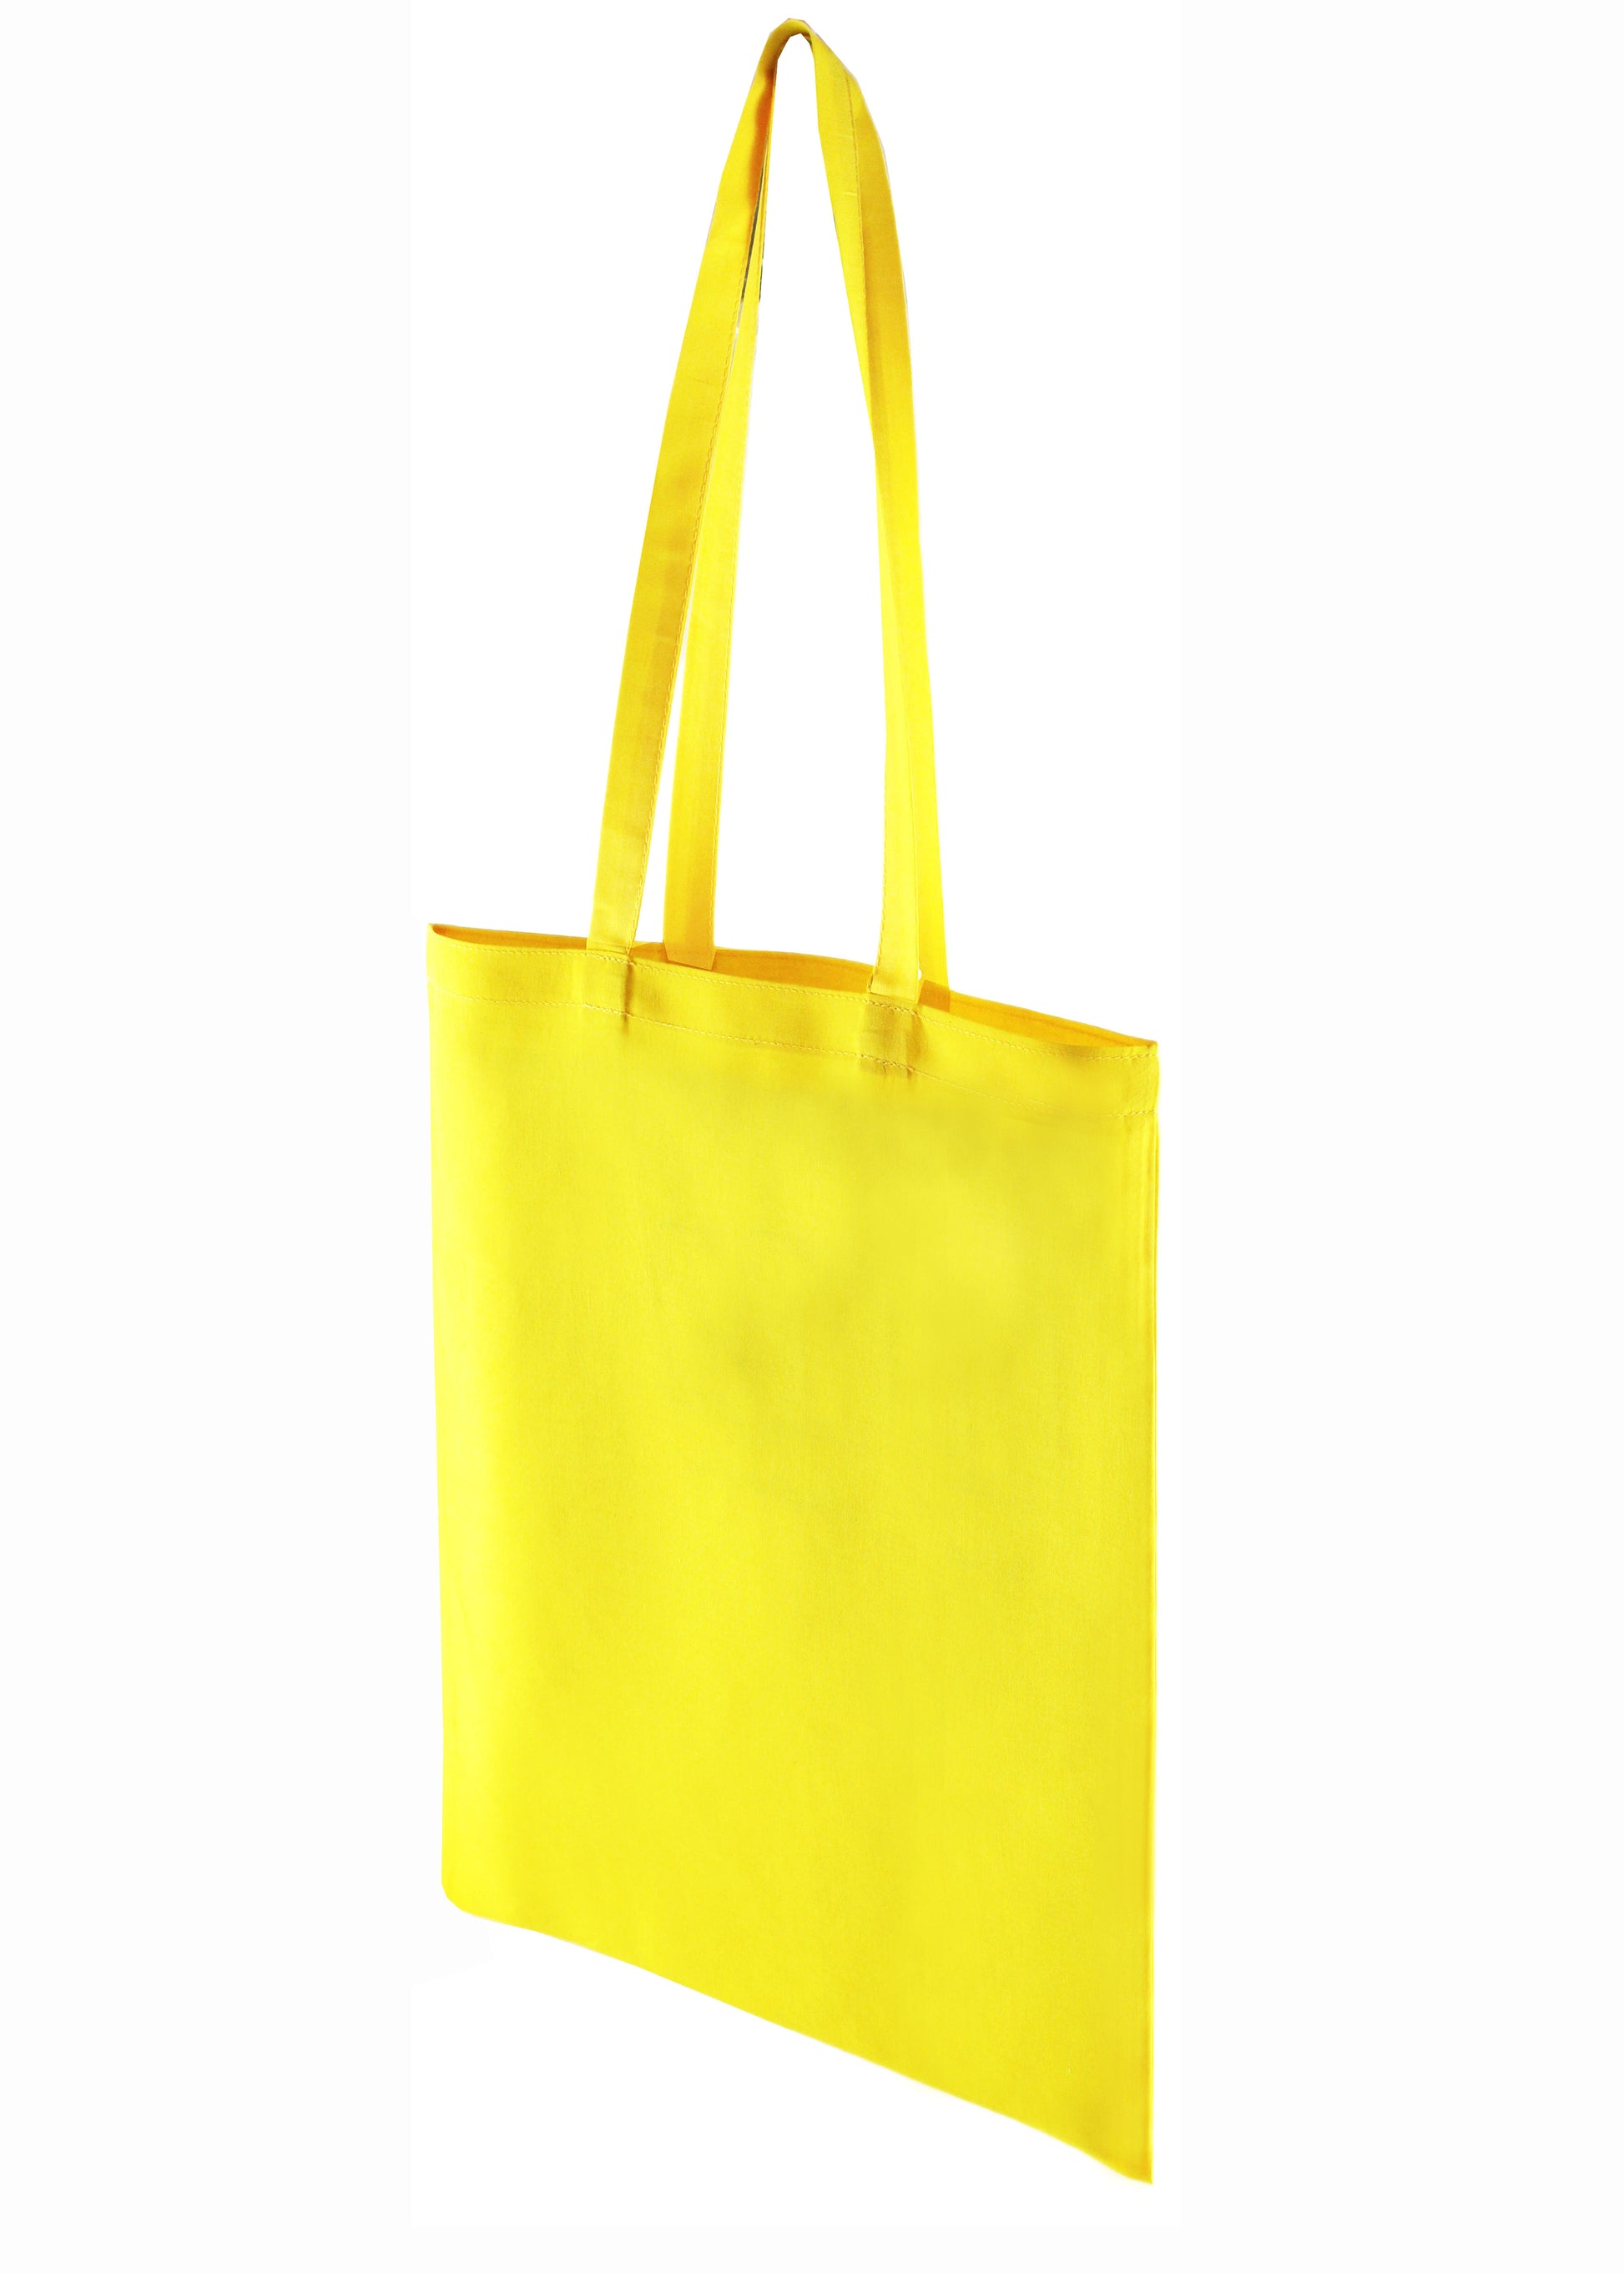 Yellow Coloured Cotton Bags for Life